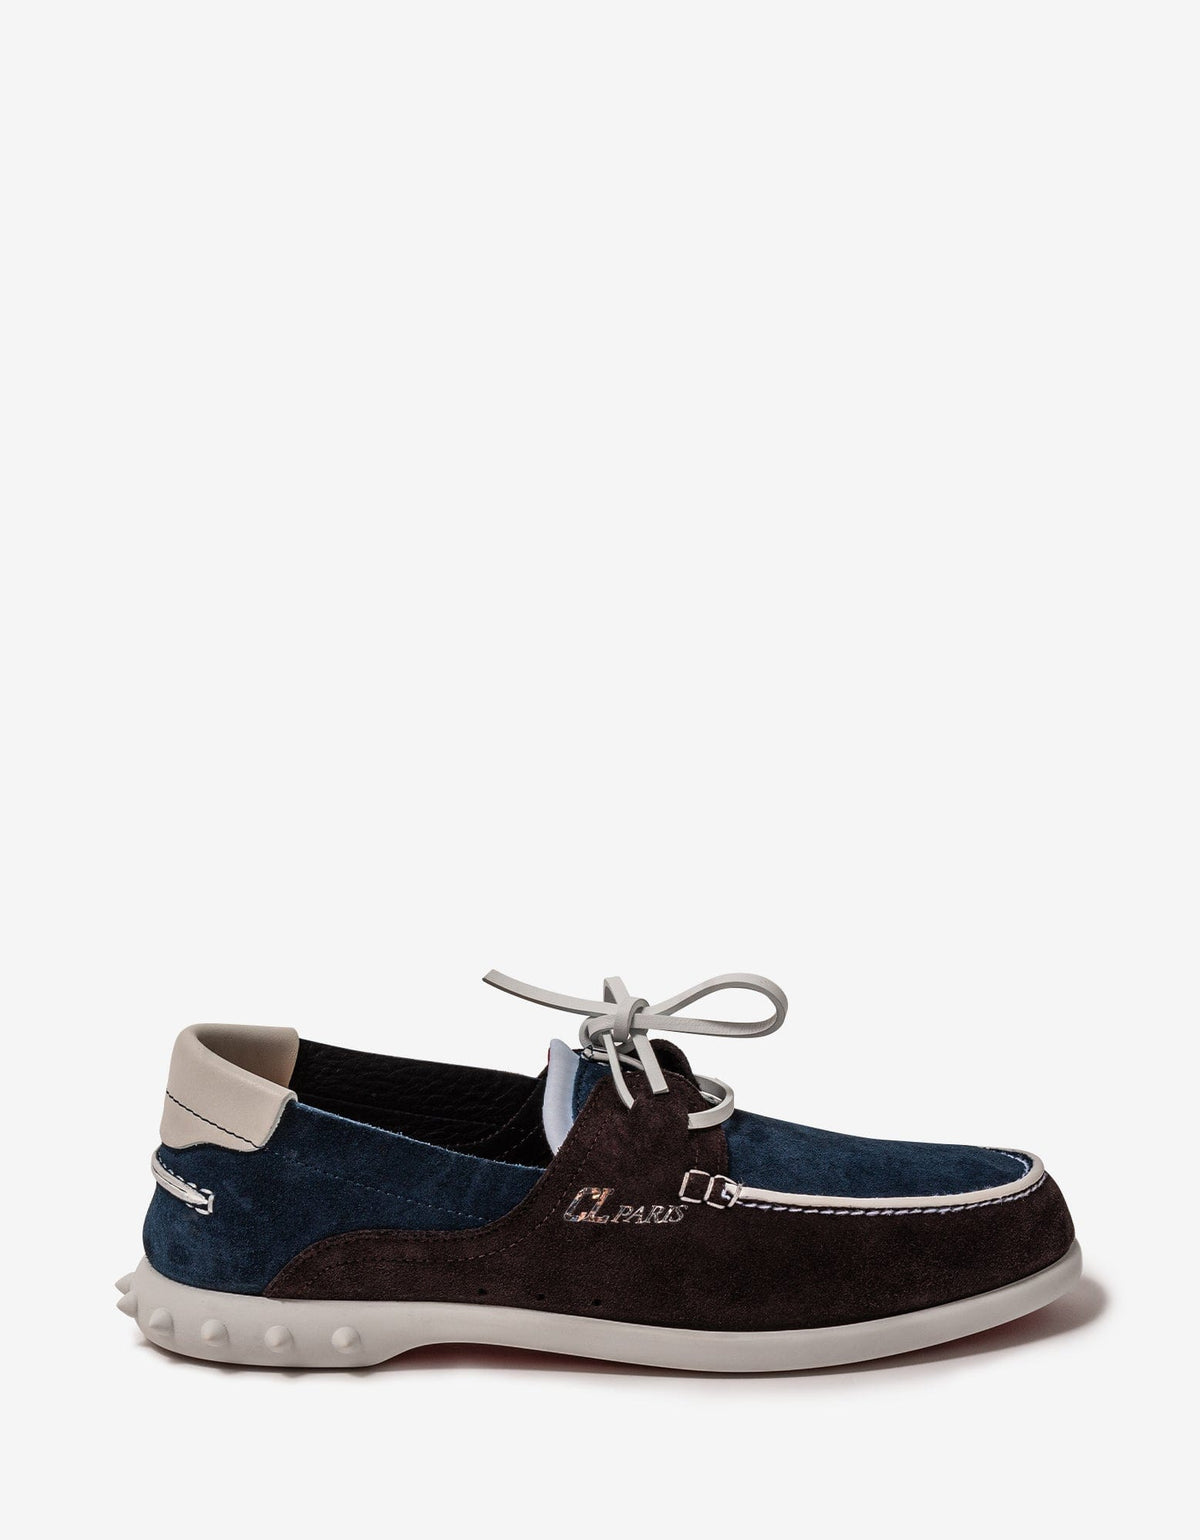 Christian Louboutin Geromoc Navy & Brown Suede Leather Loafer -